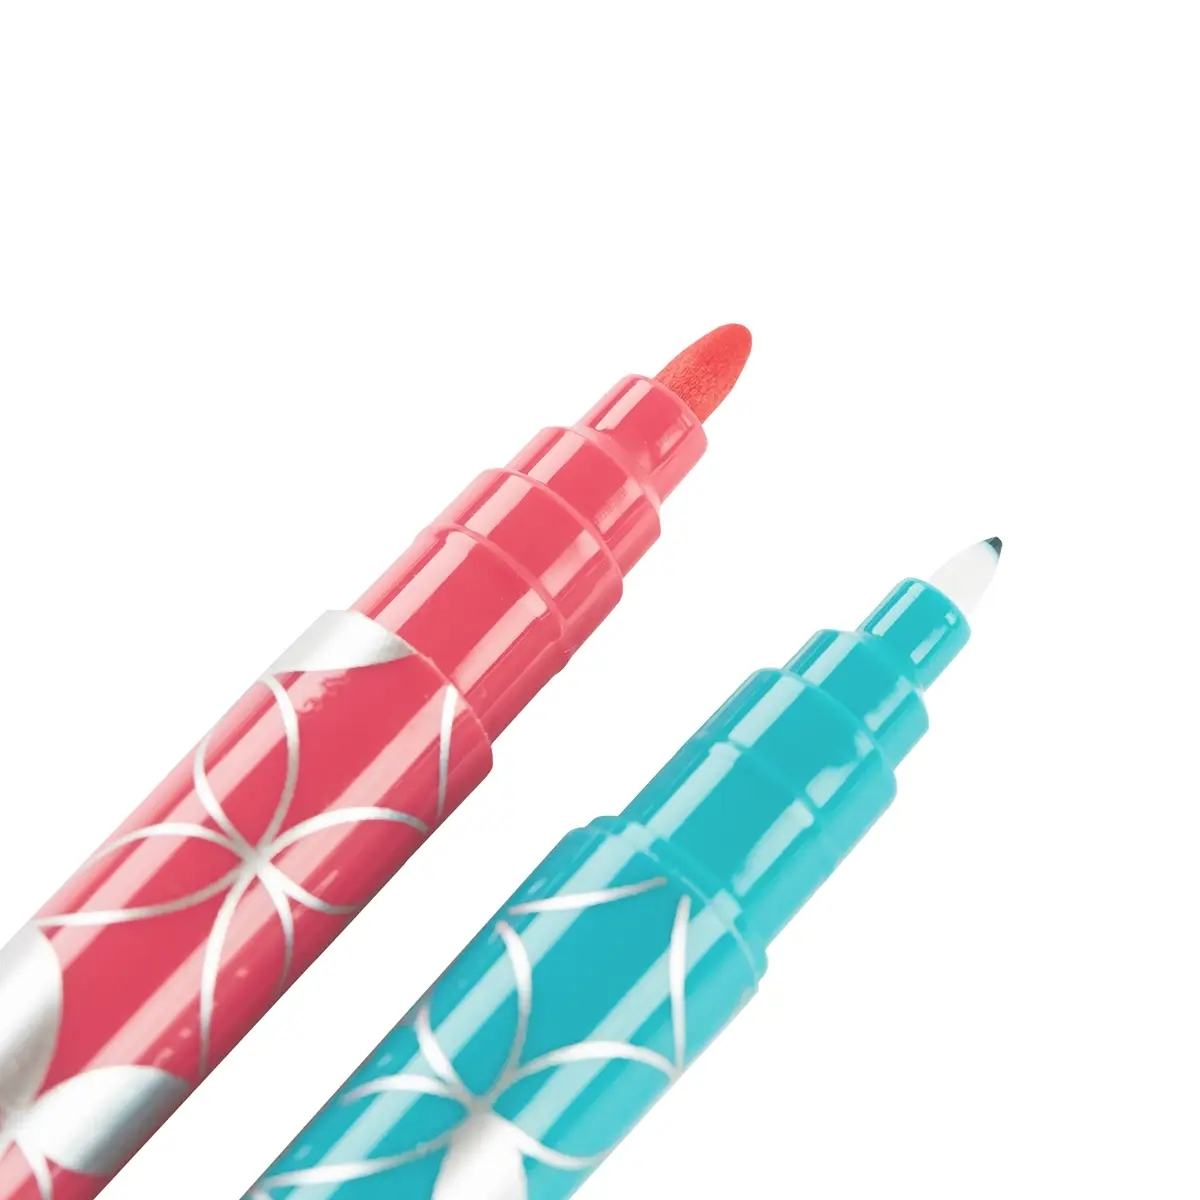 Erin Condren Dual Tip Classic Colourful Markers - 6 pack